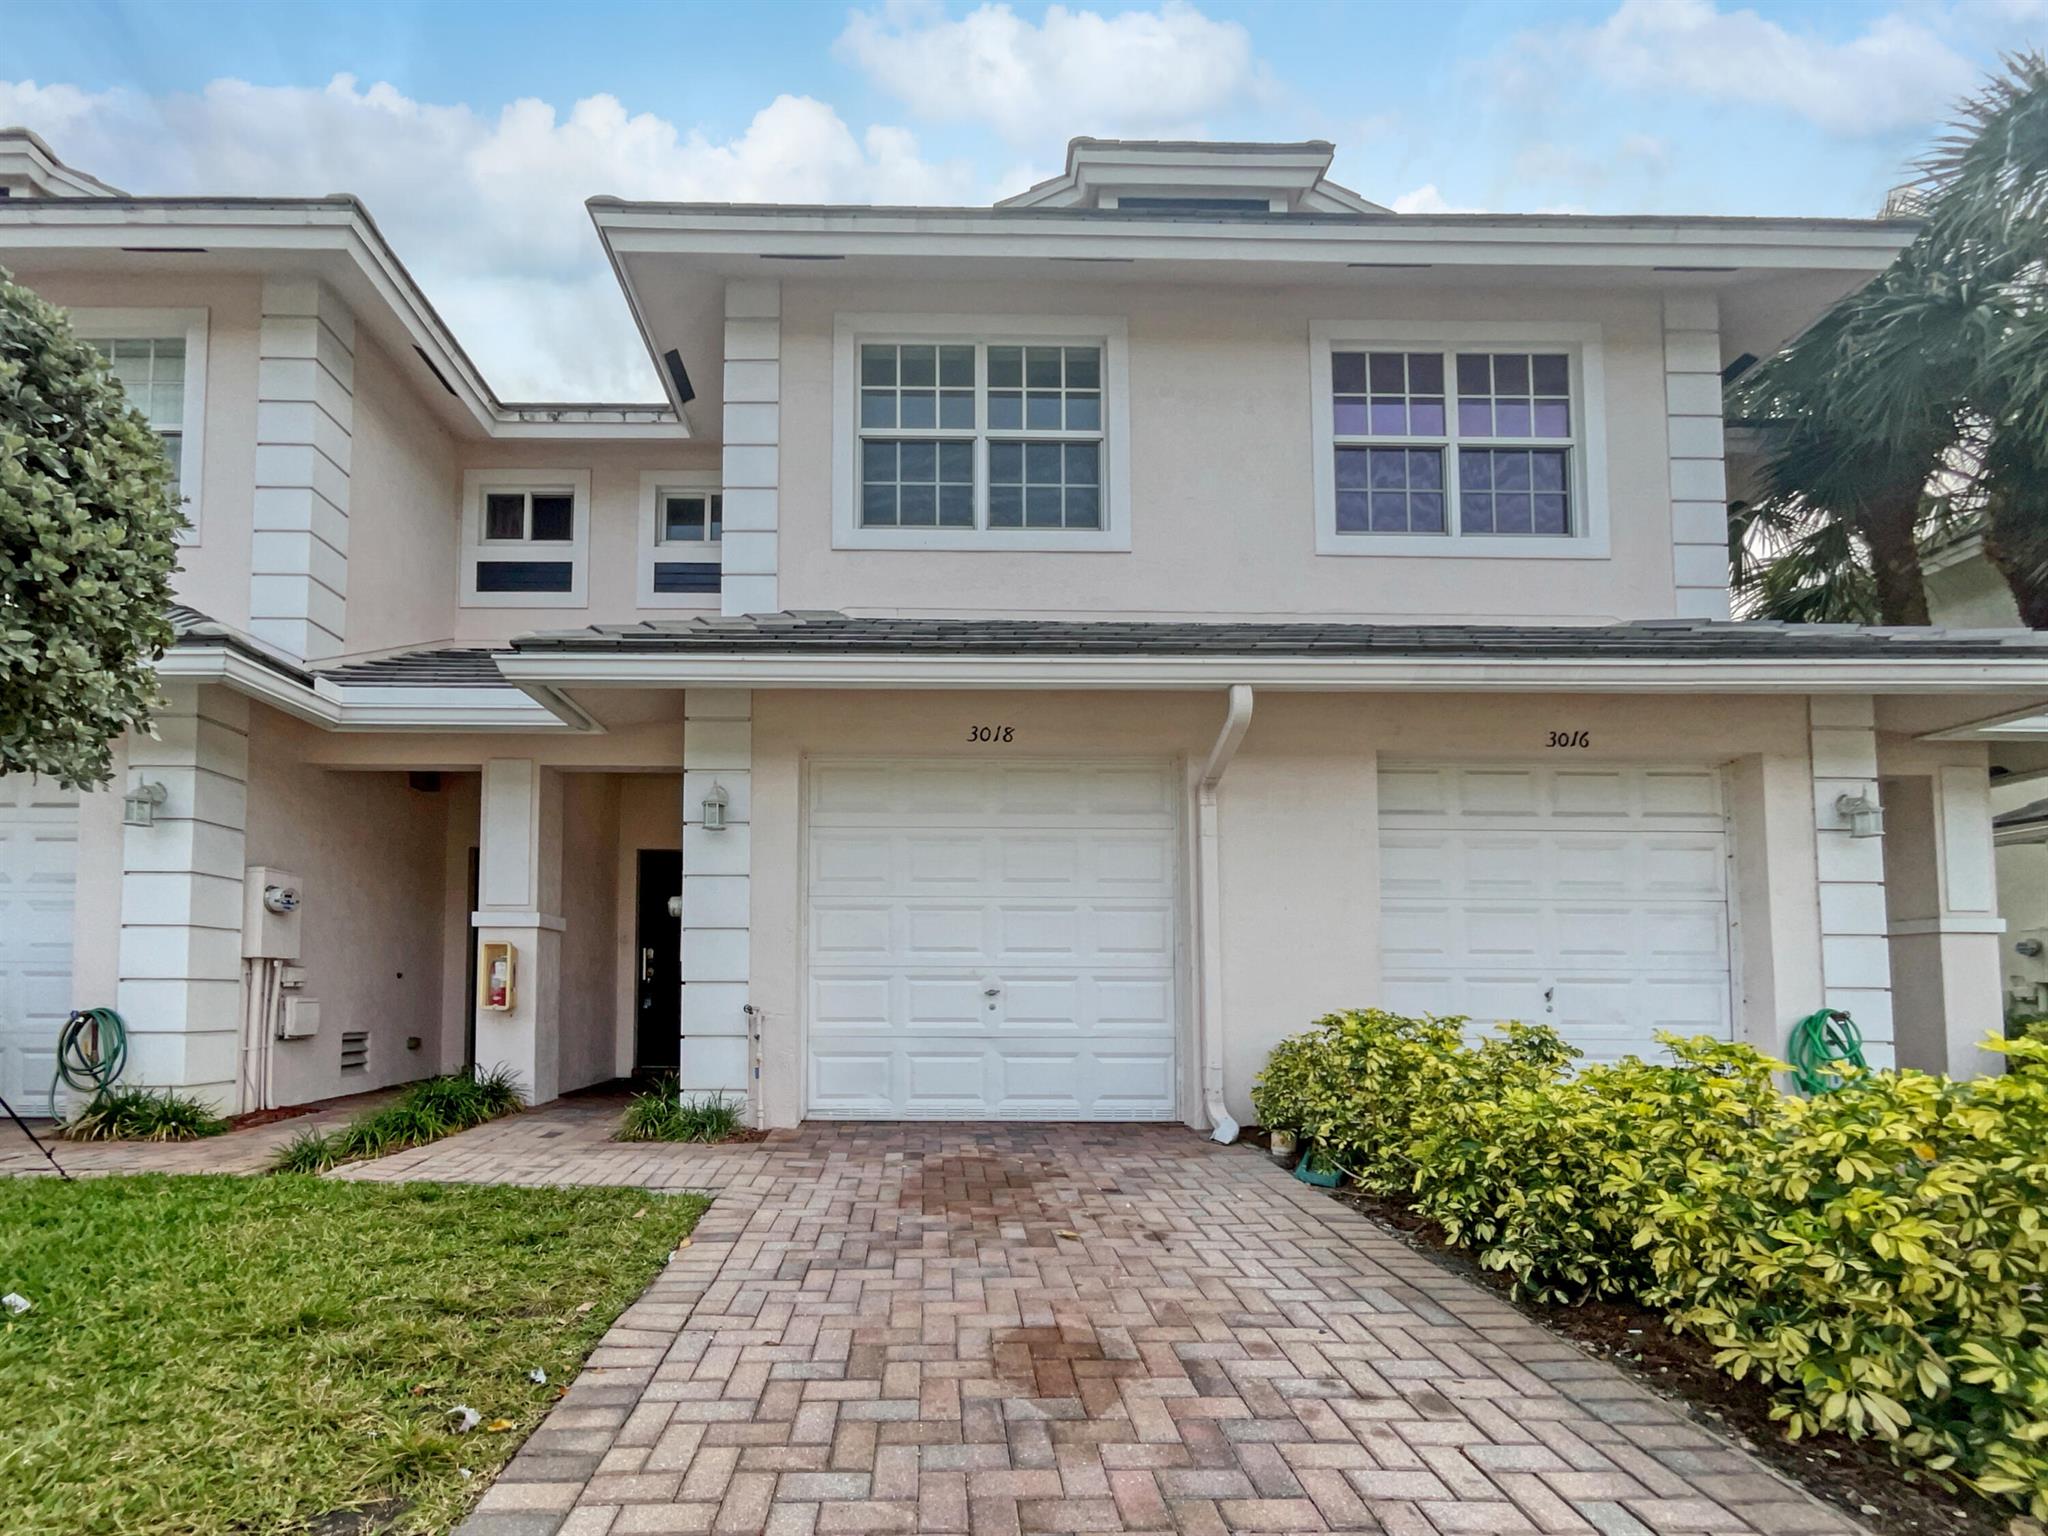 View Oakland Park, FL 33311 townhome